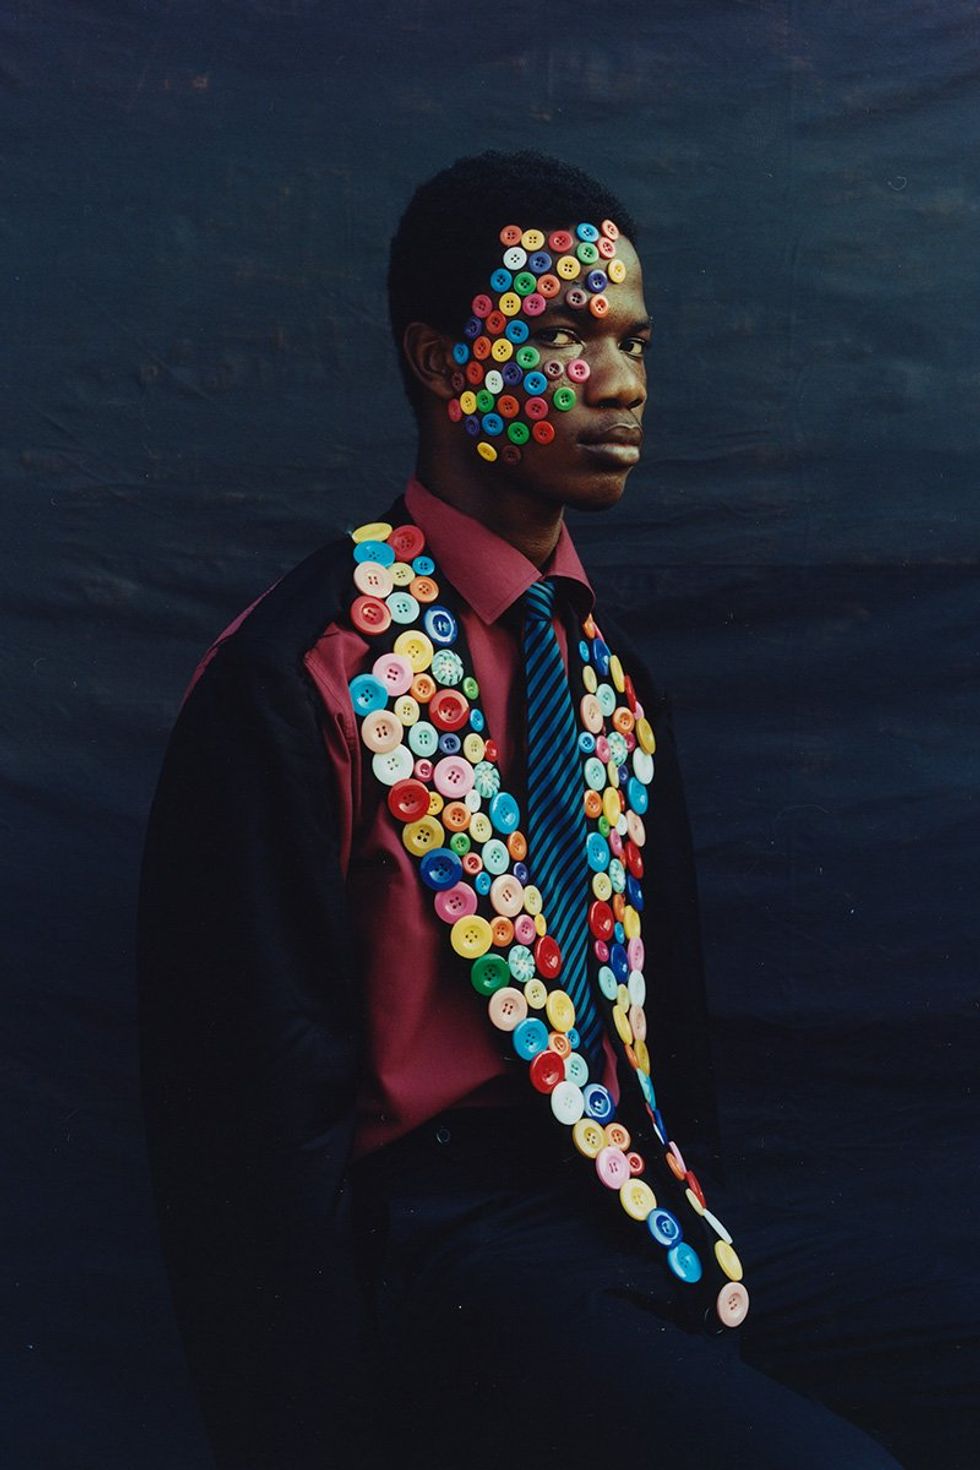 An image taken by the photographer of a man looking at the camera with buttons on the collar of his jacket and on one side of his face.